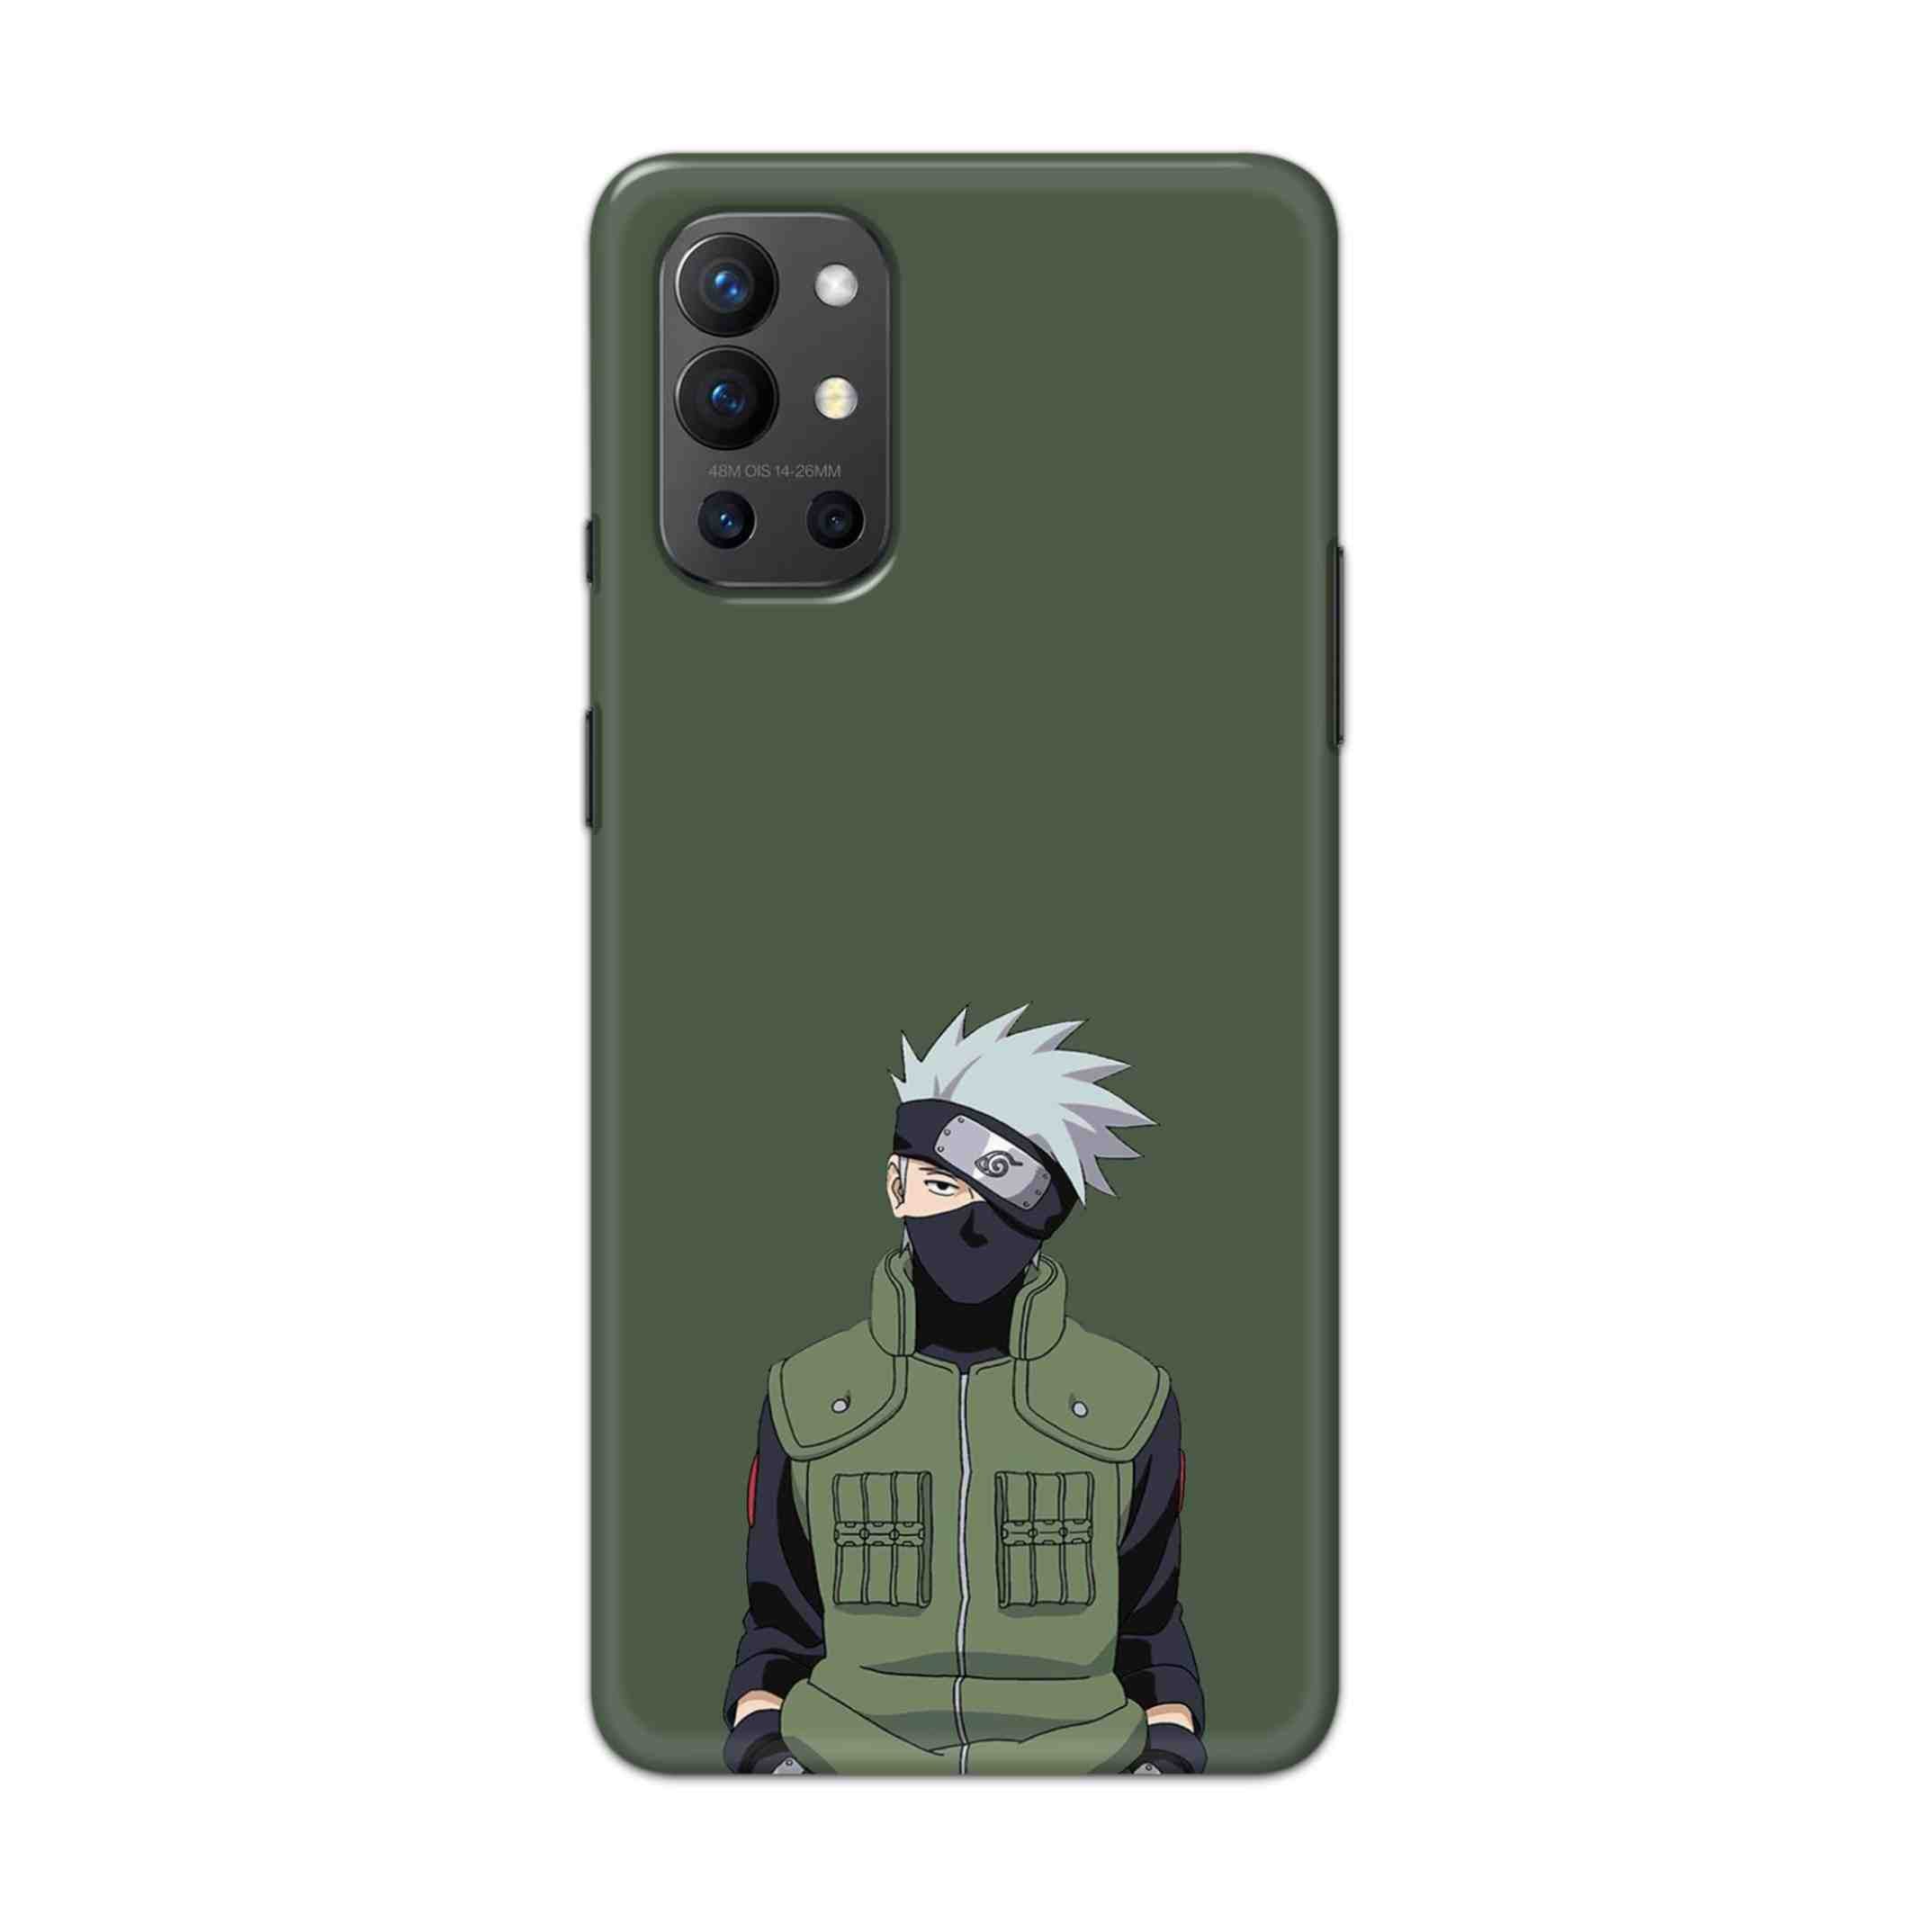 Buy Genesis Hard Back Mobile Phone Case Cover For OnePlus 9R / 8T Online